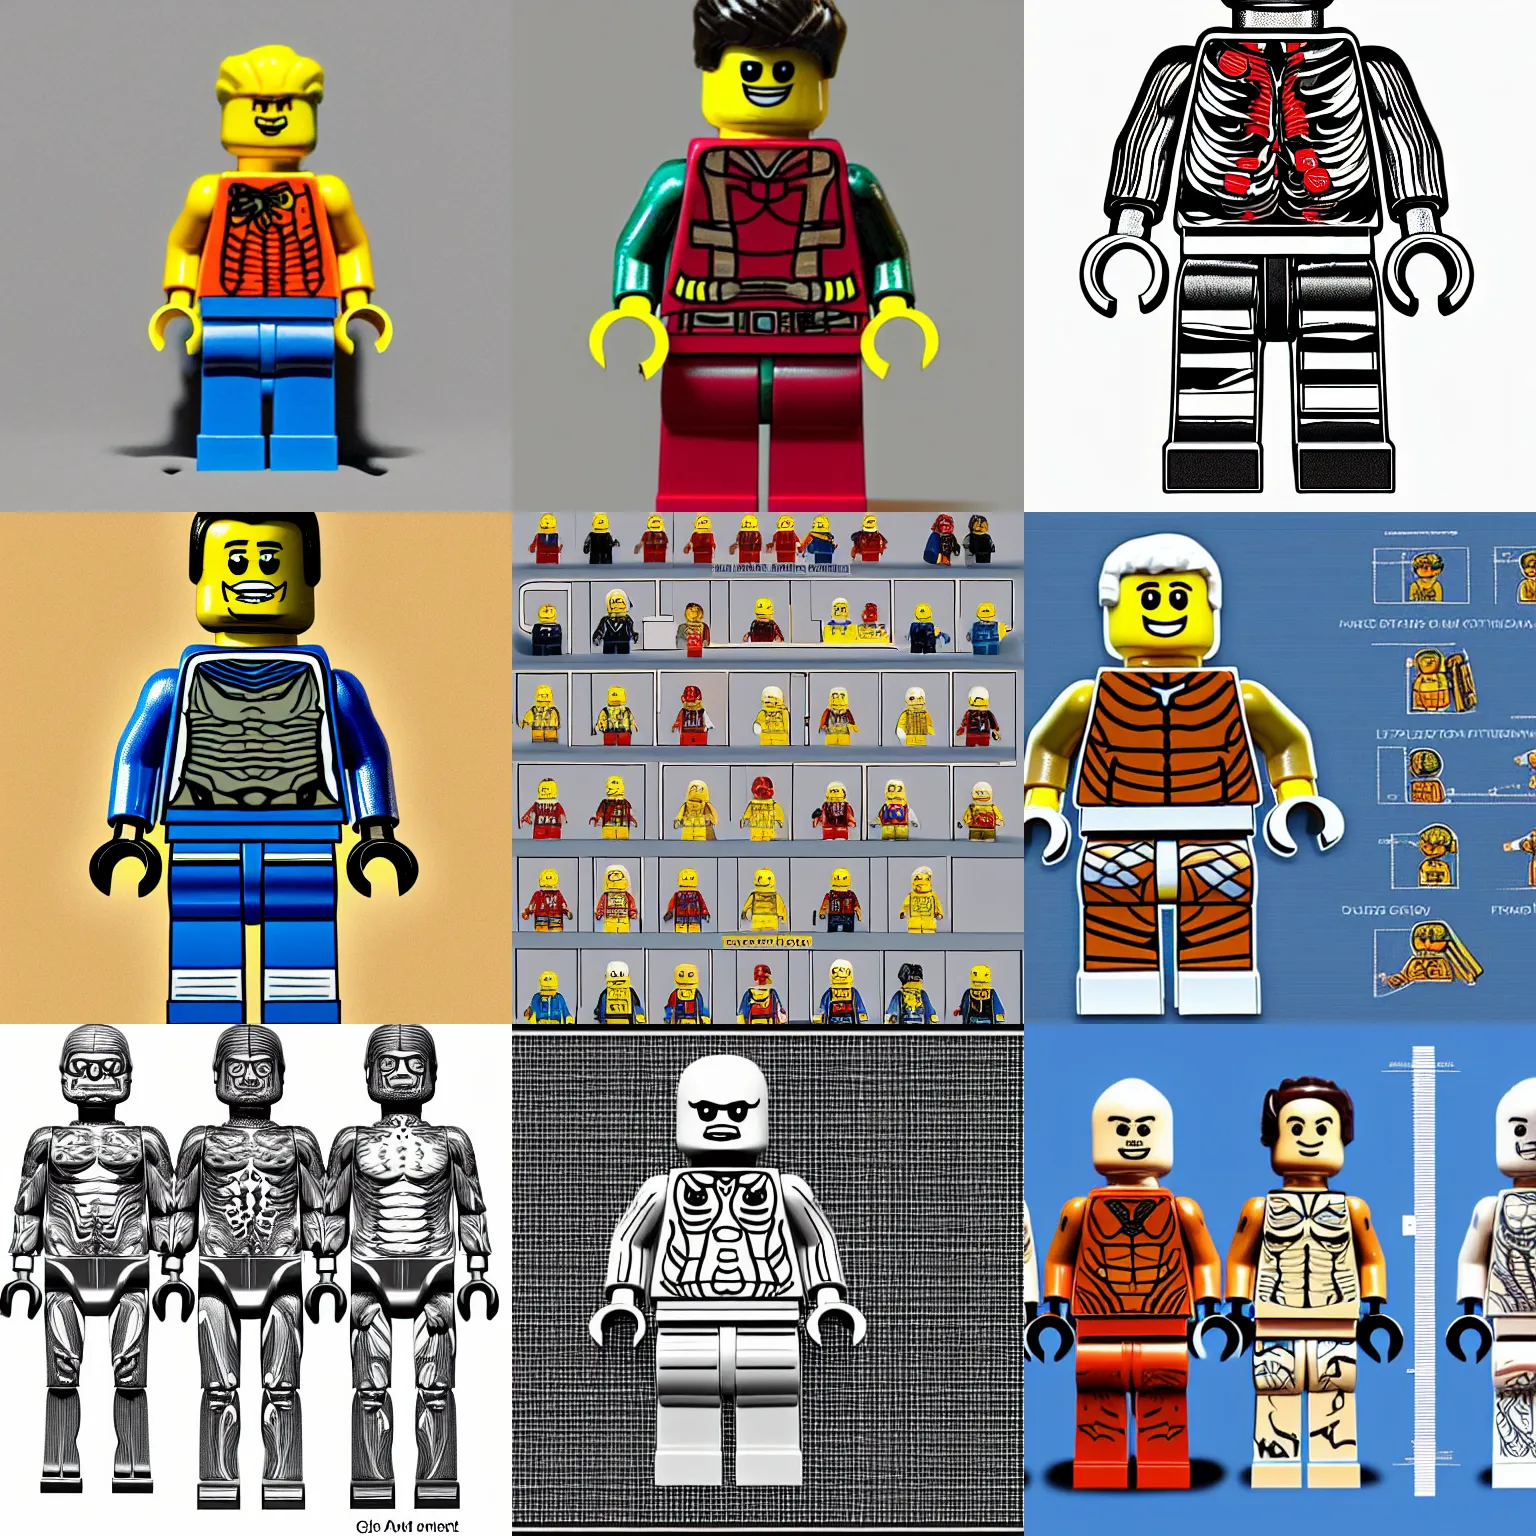 Prompt: detailed anatomical diagram of a lego minifigure